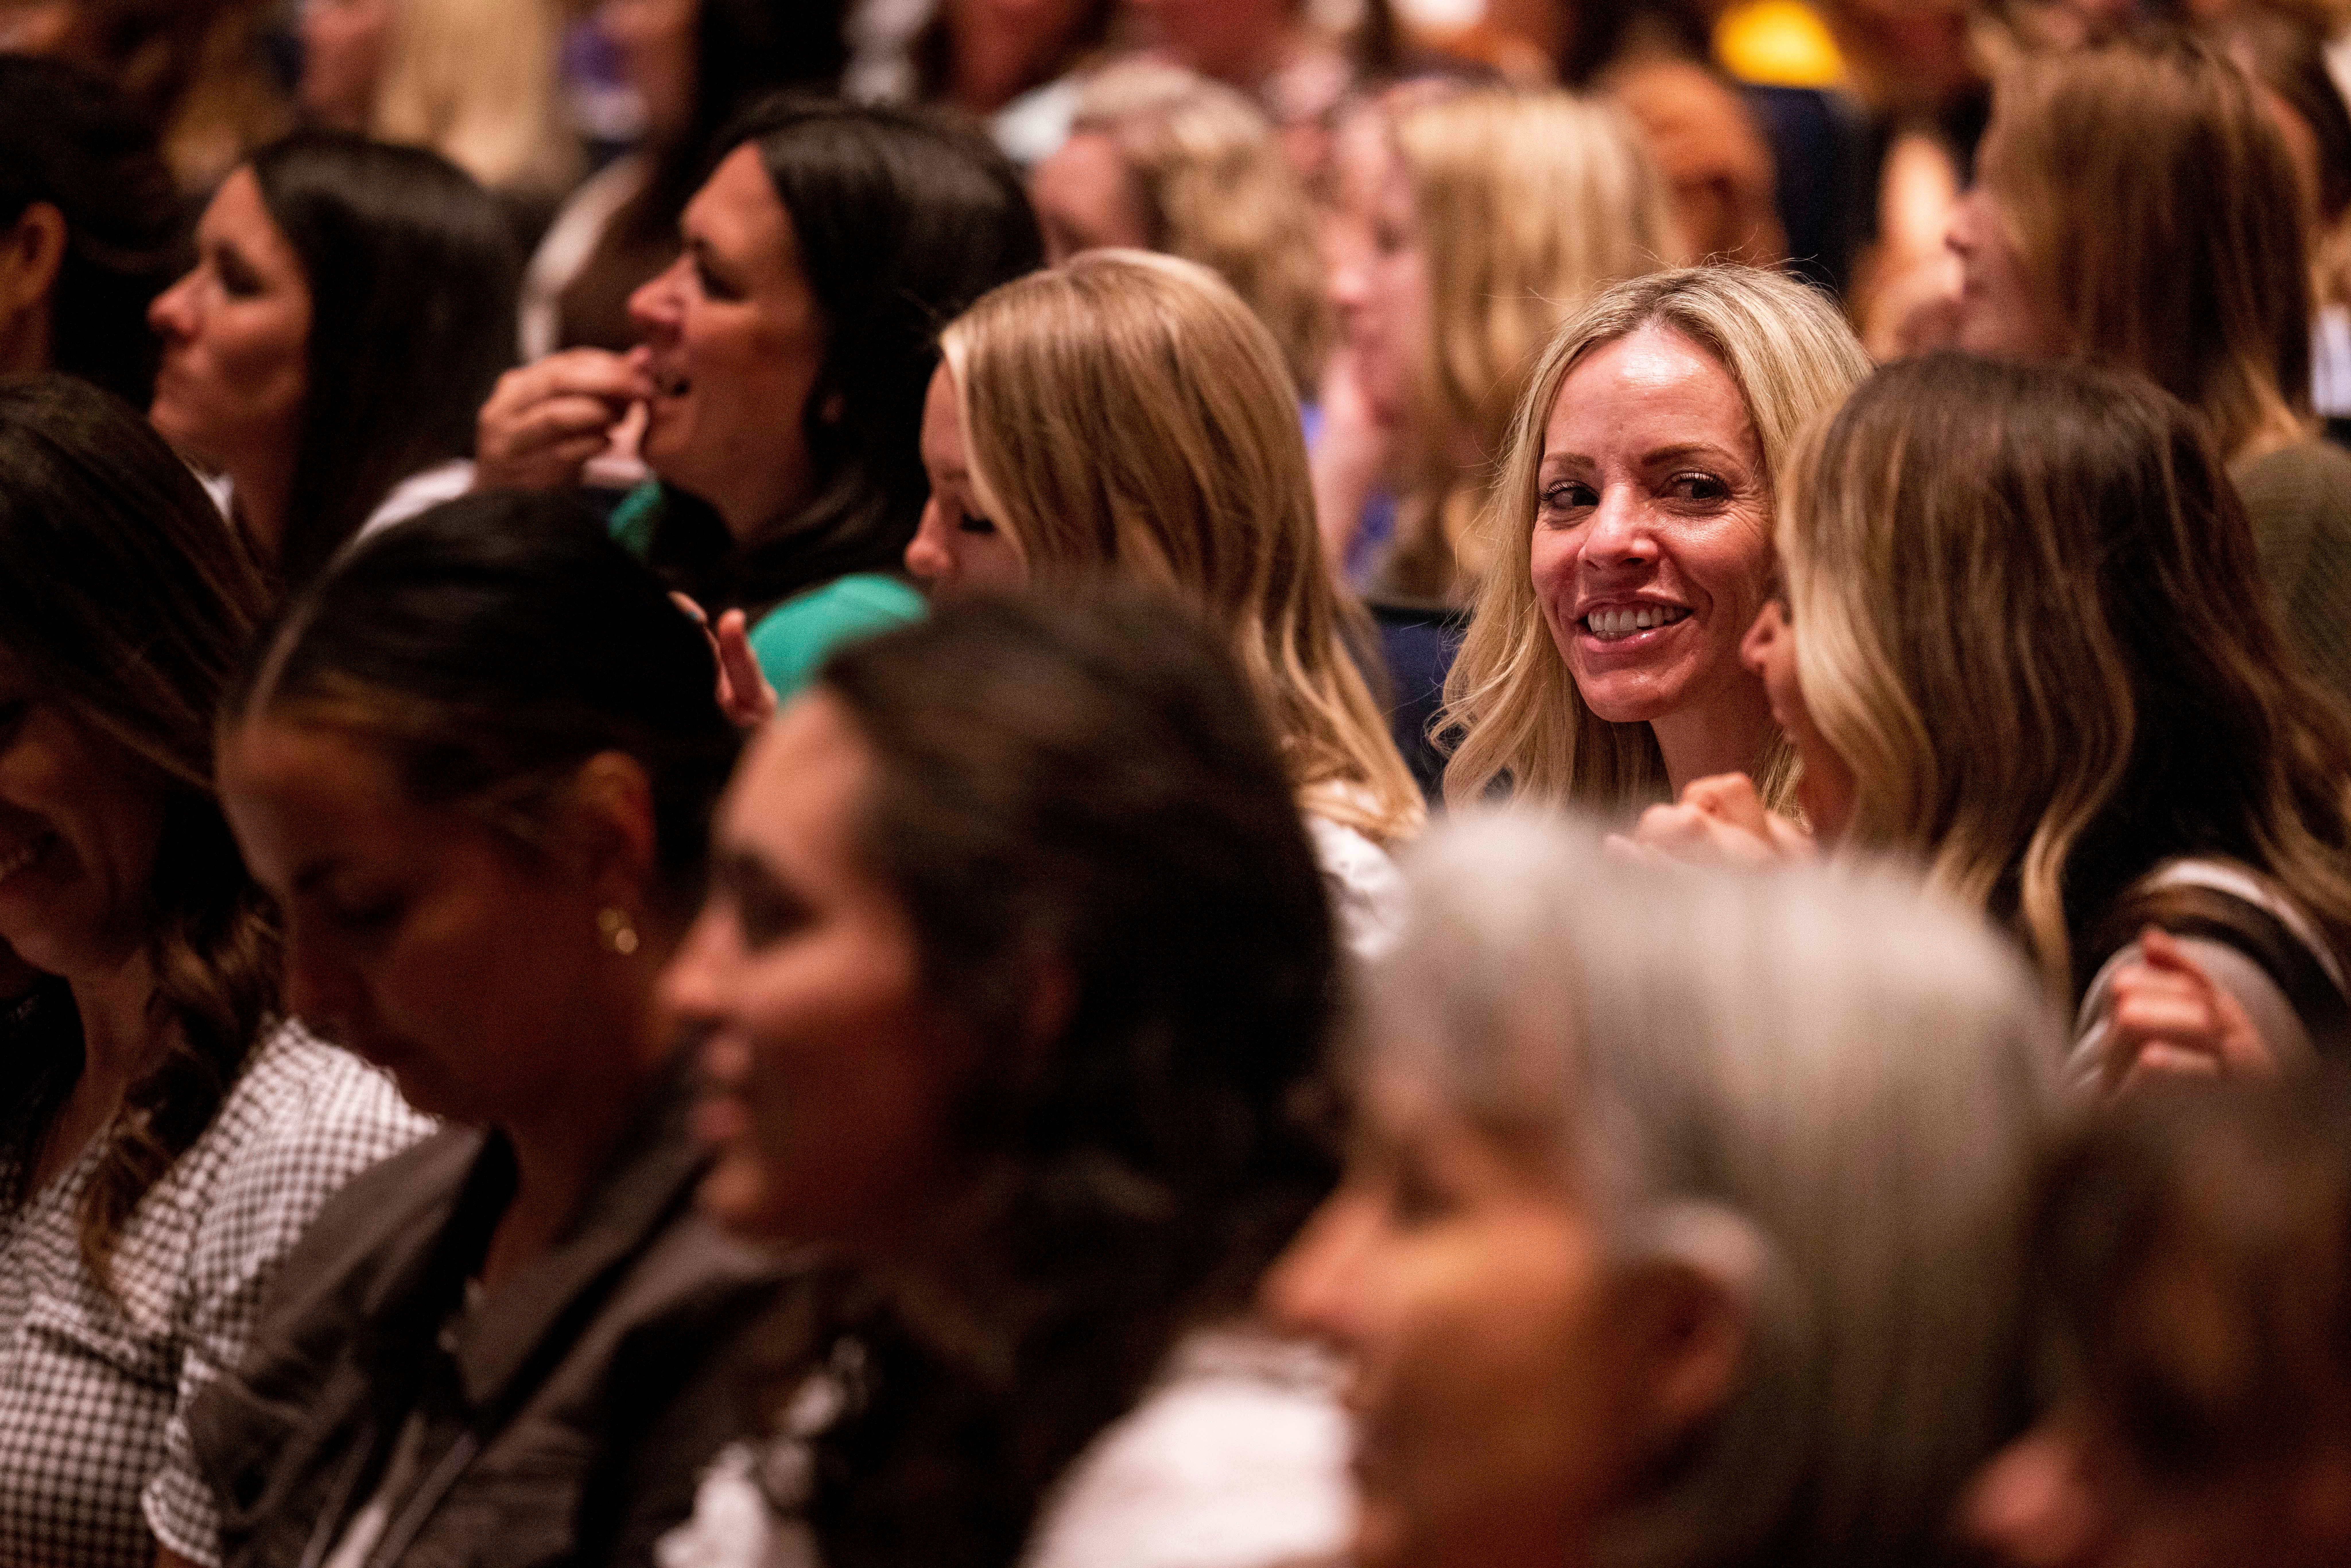 Women attend a session of BYU Women’s Conference on the campus of Brigham Young University in Provo, Utah. The 2023 conference is in person May 3-5.